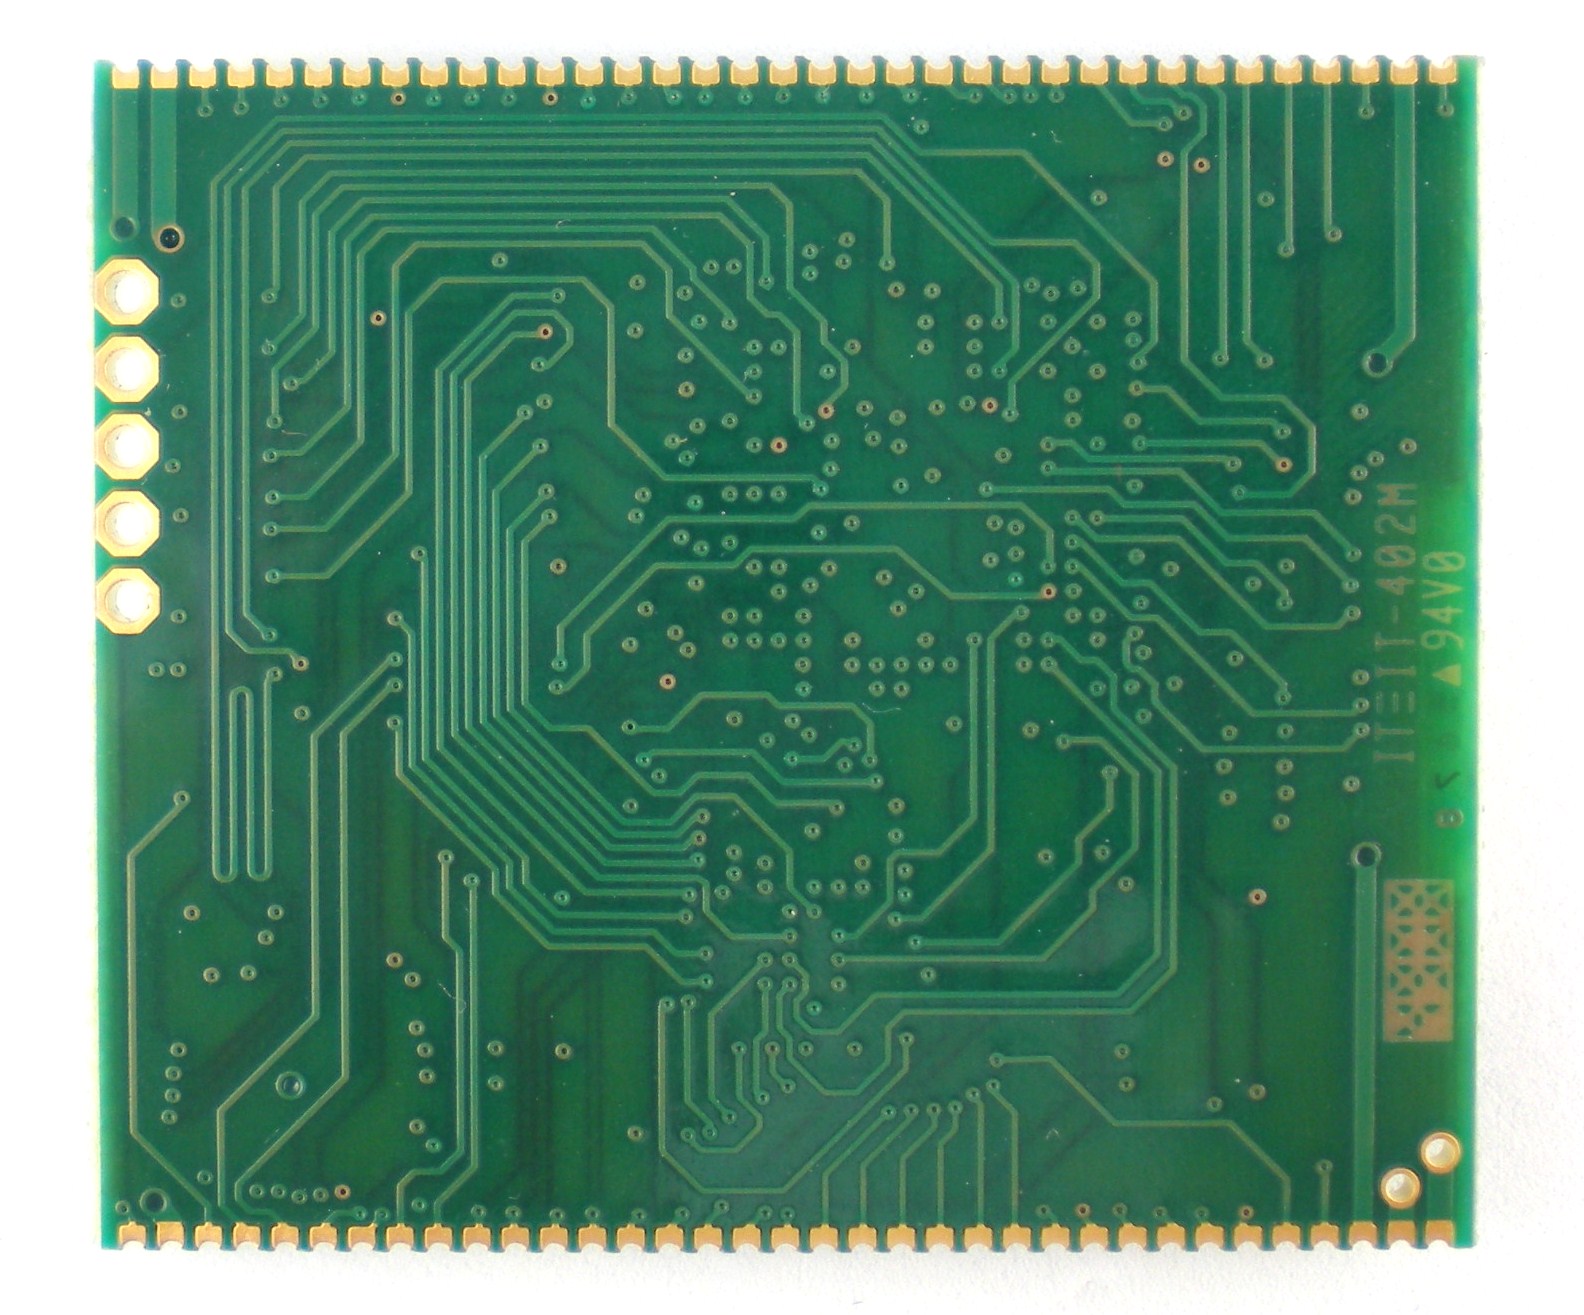 The process and advantages of PCB assembly